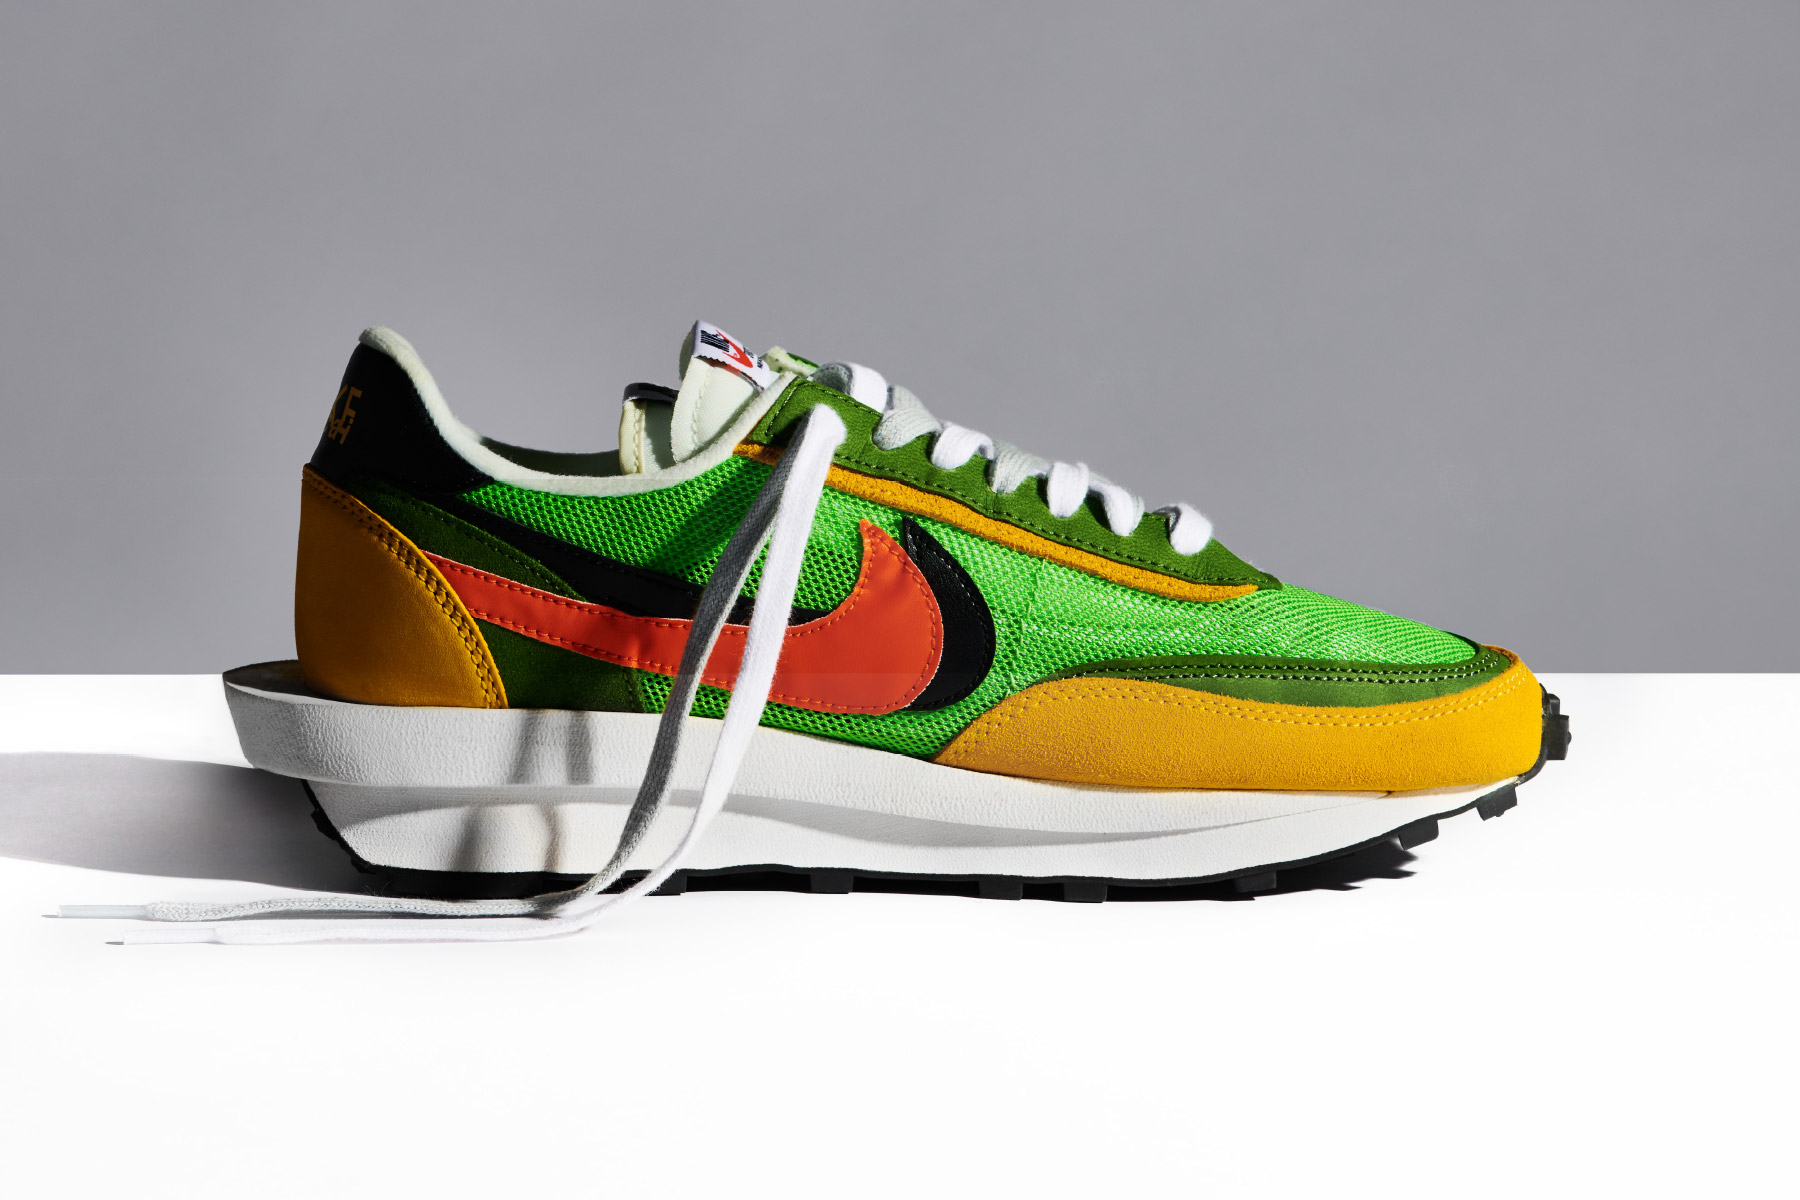 Sacai and Nike LDWaffle collab by Chitose Abe